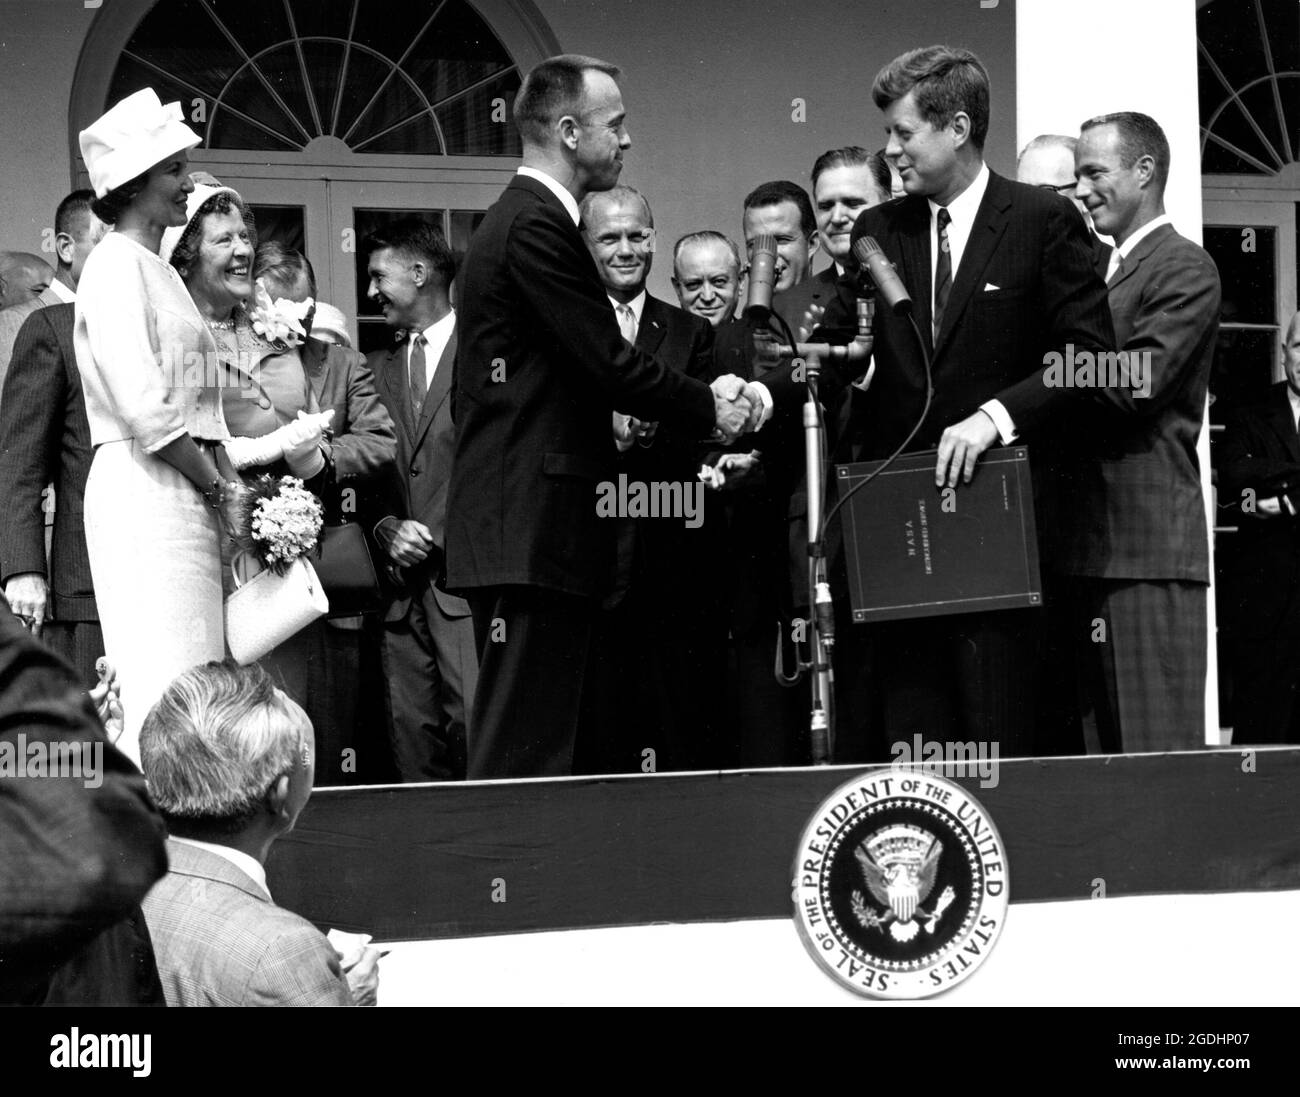 President John F. Kennedy congratulates astronaut Alan B. Shepard, the first American in space, on his historic May 5th, 1961 ride in the Freedom 7 spacecraft and presents him with the NASA Distinguished Service Award. Stock Photo